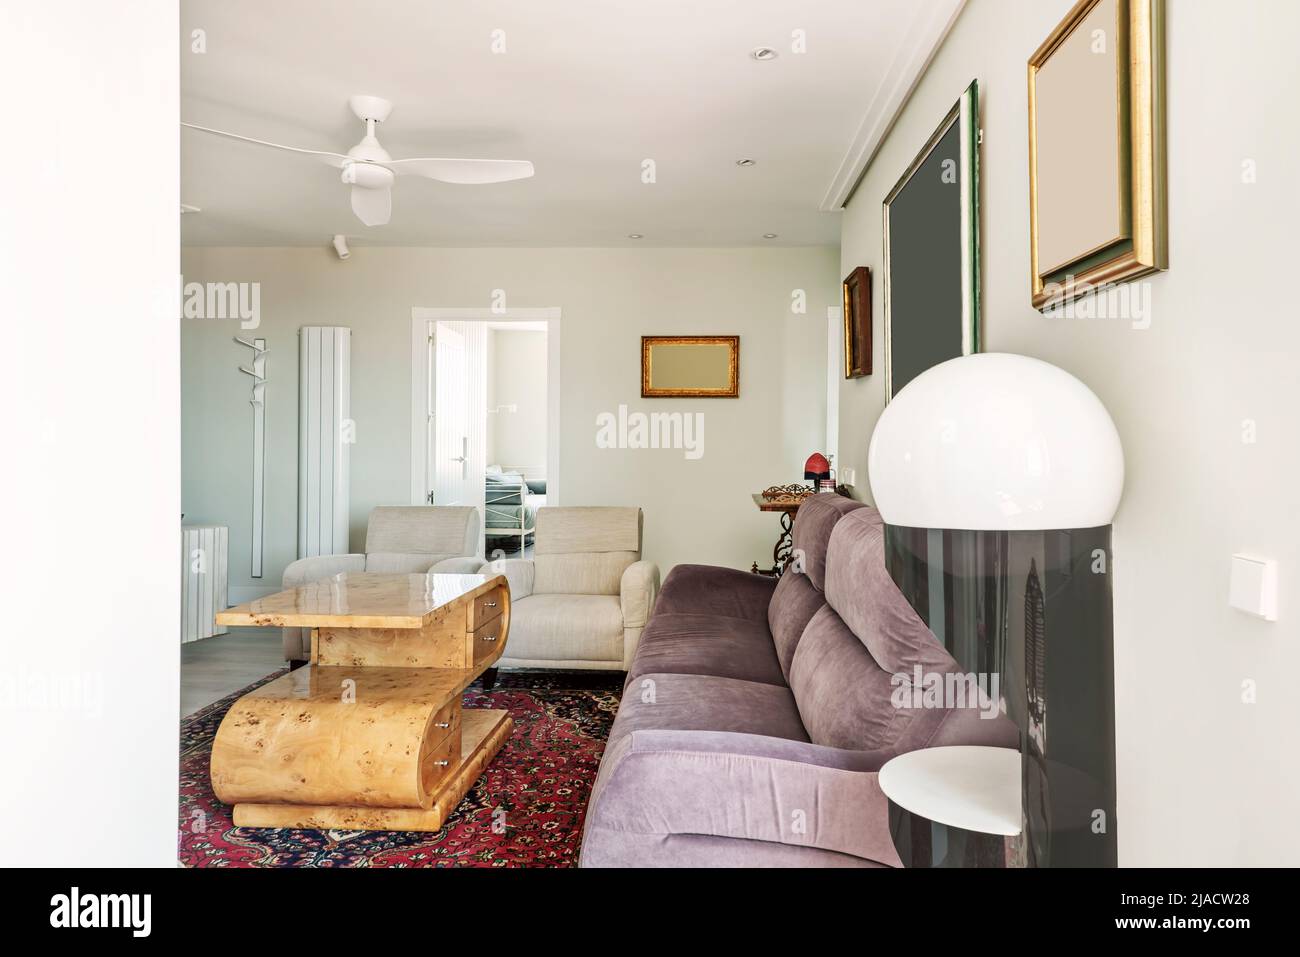 Living room with decorative furniture and white ceiling fan Stock Photo